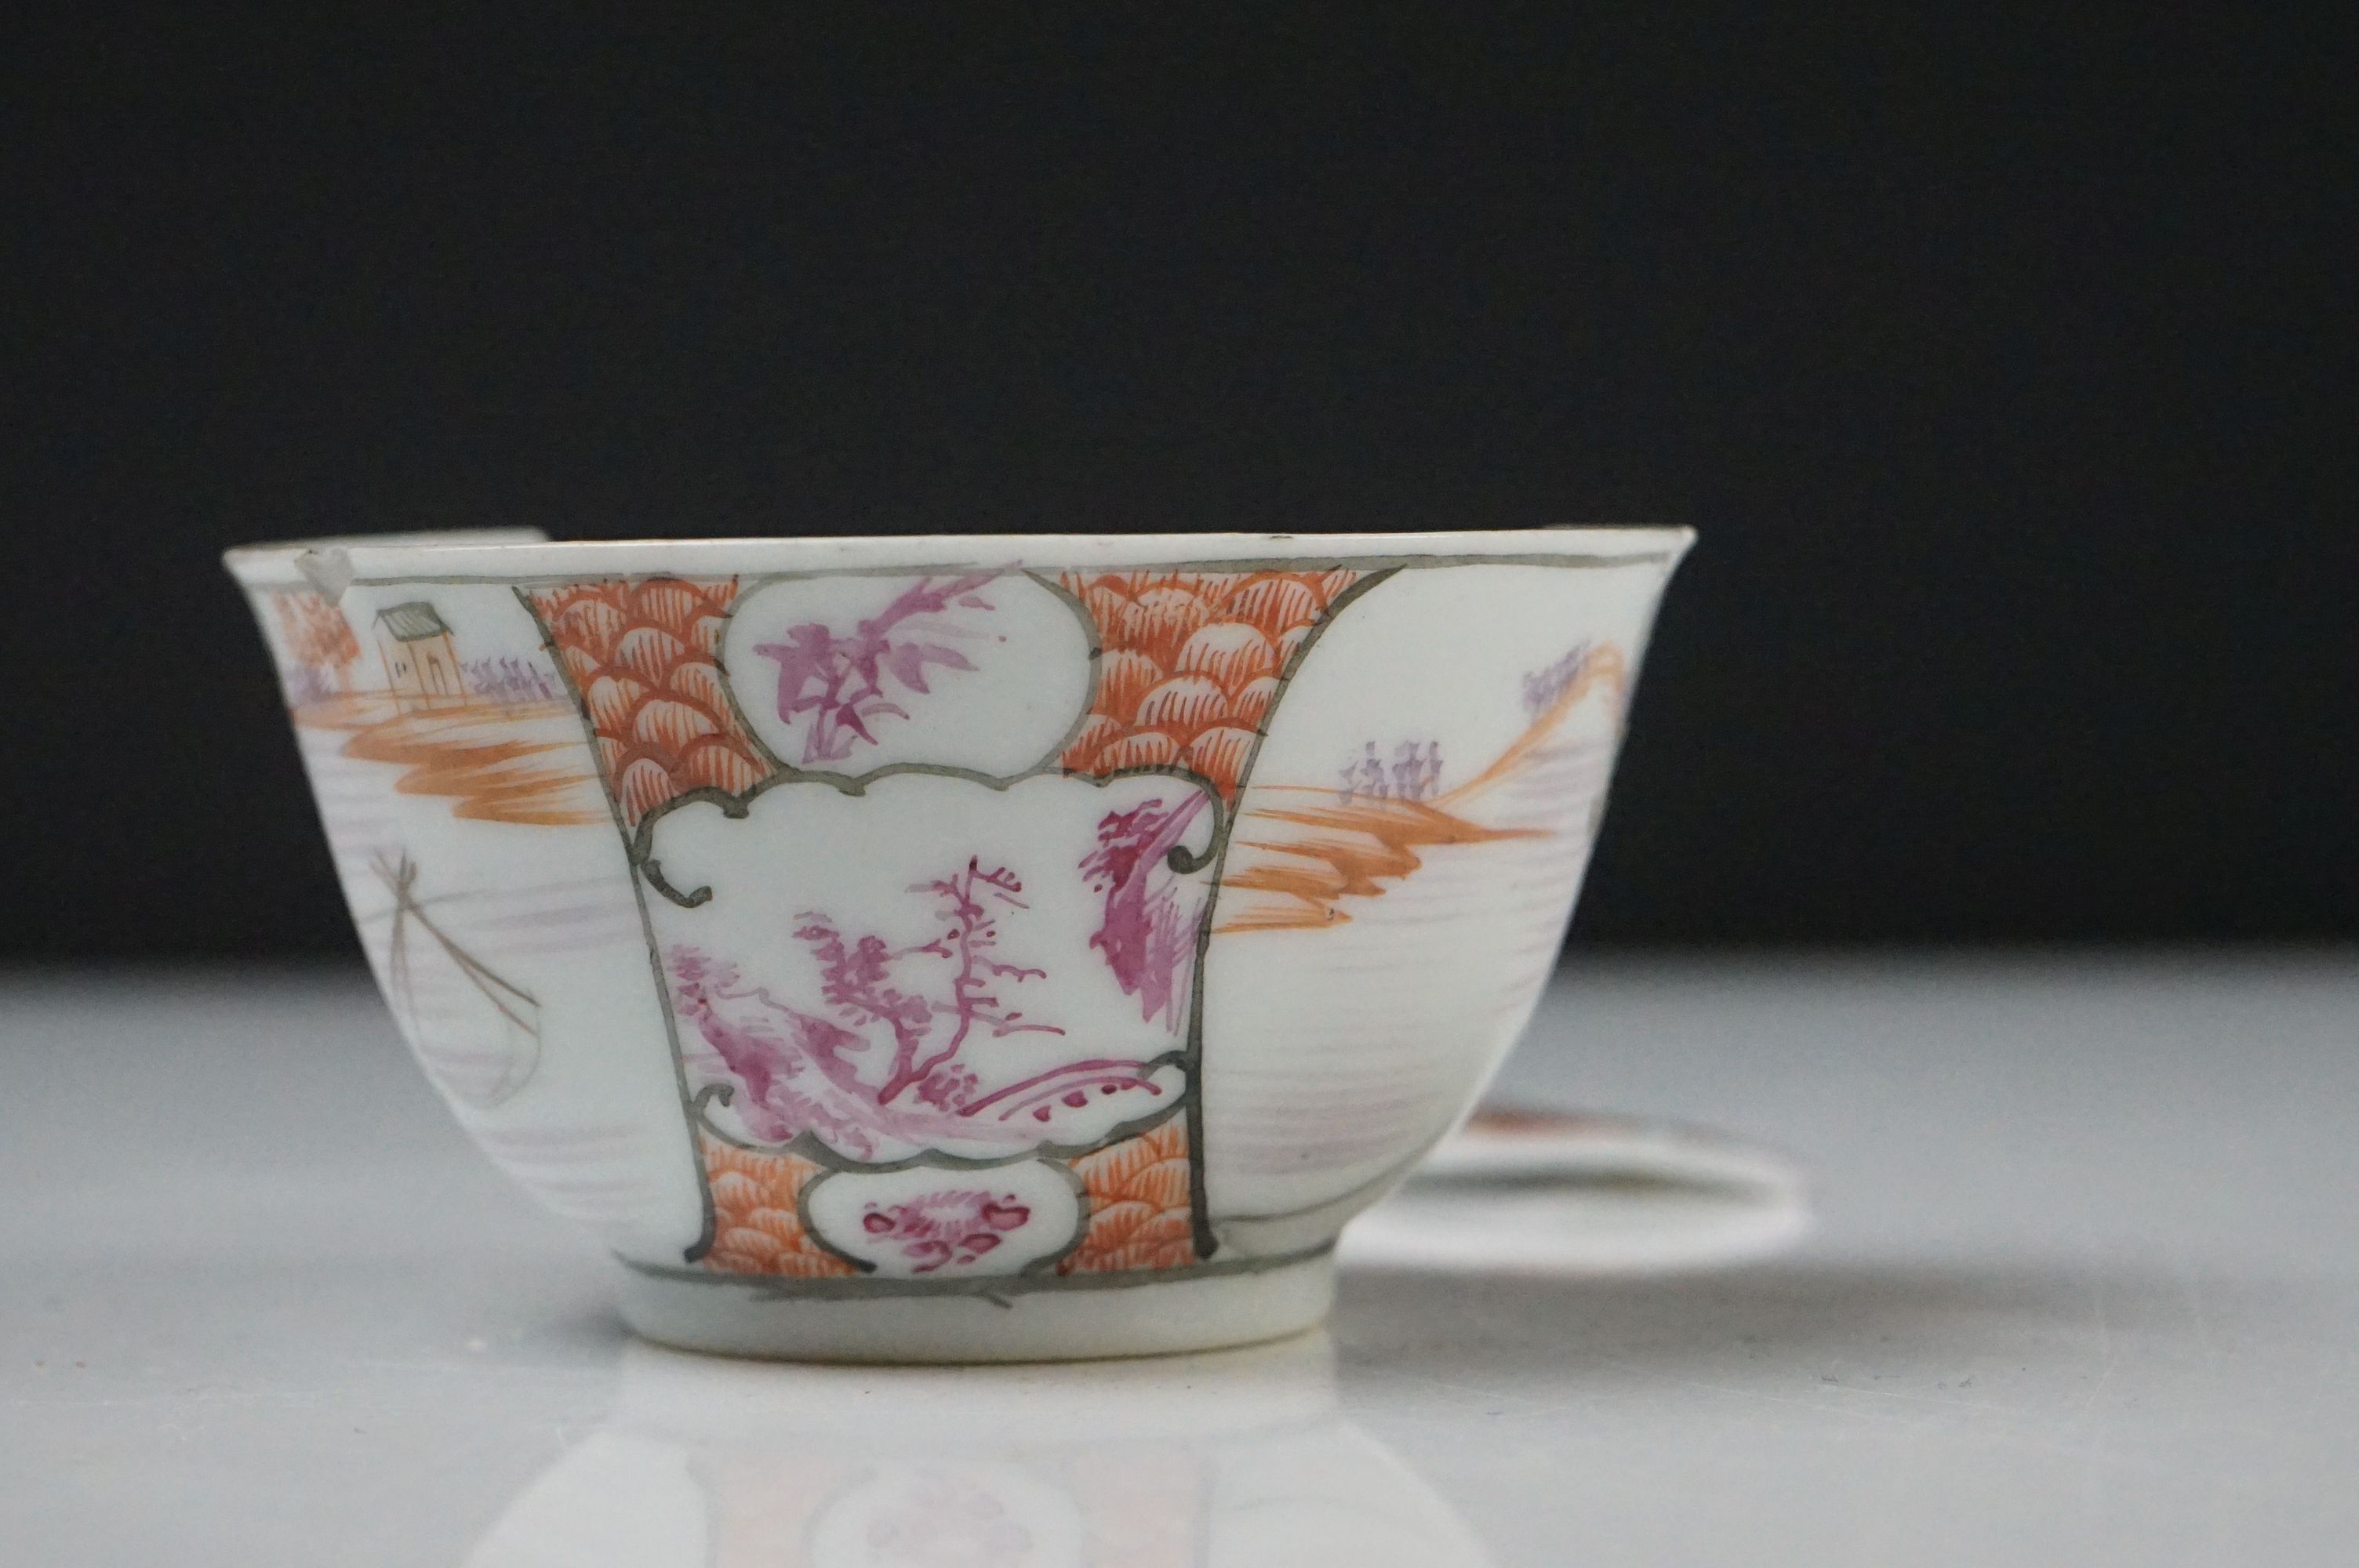 Collection of Chinese Tea Bowls, Cups and Saucers, 18th century onwards, mainly famille rose and - Image 24 of 28